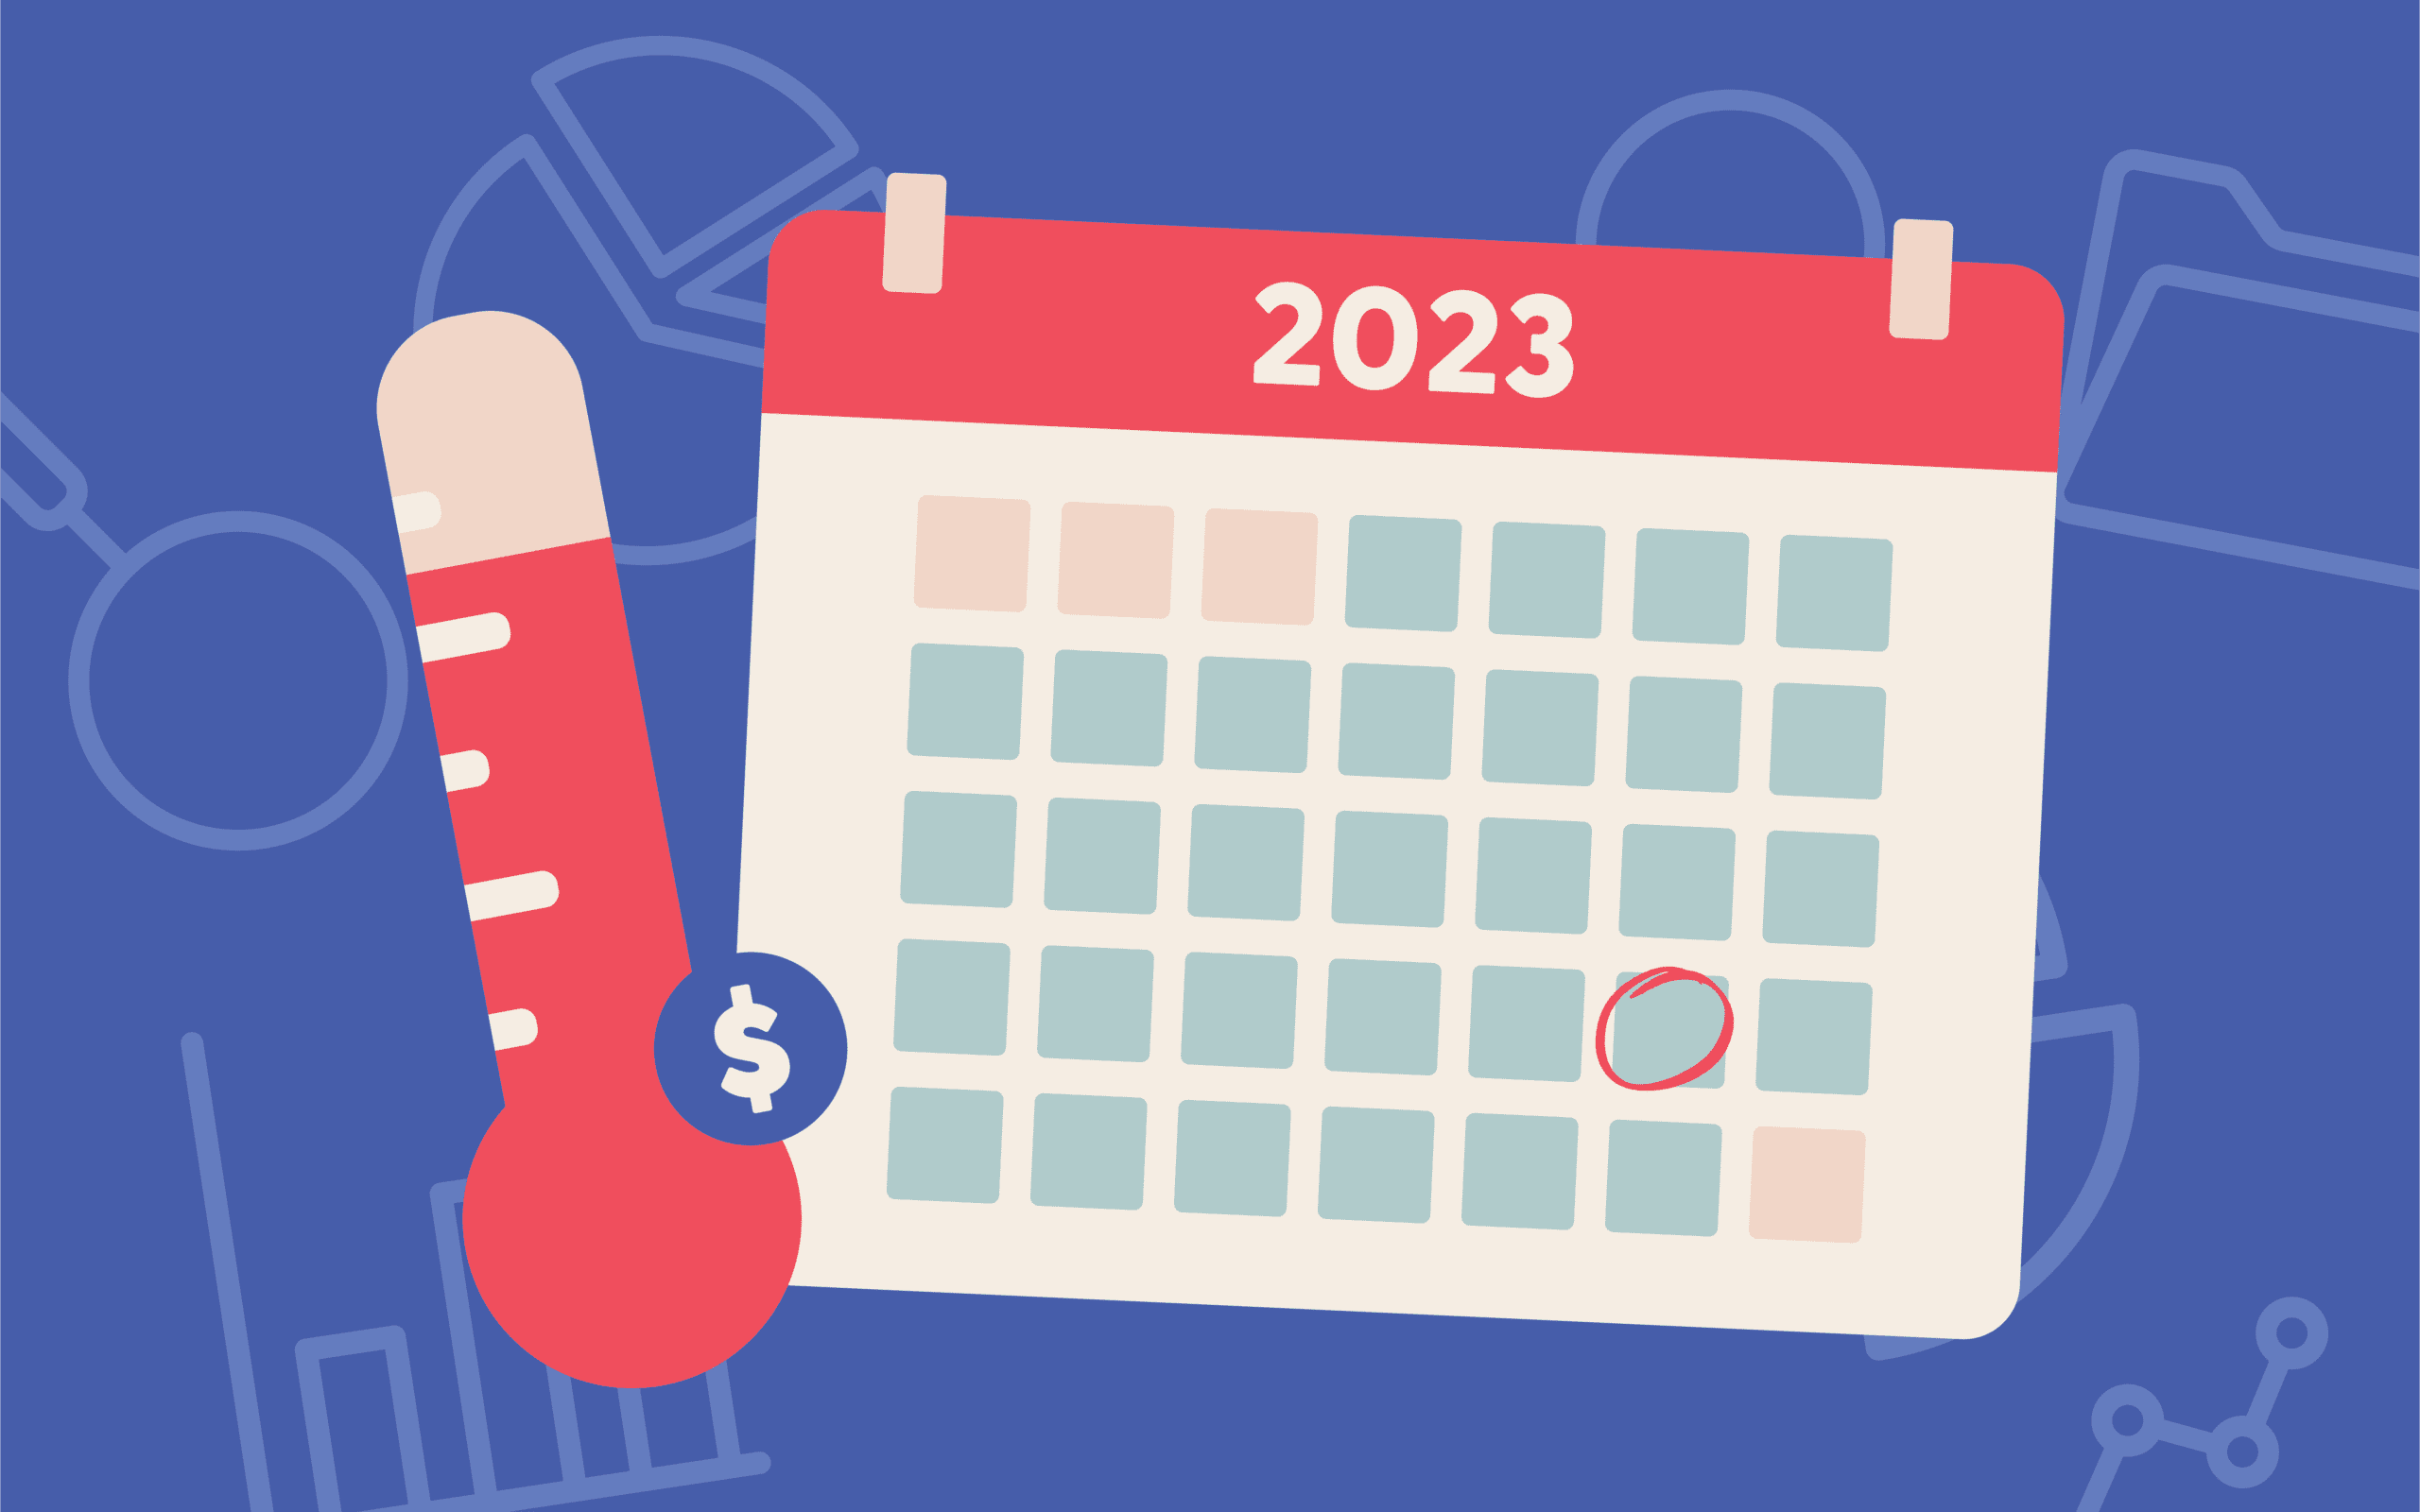 Illustration of a 2023 calendar and a money meter on a blue background with graph icons.